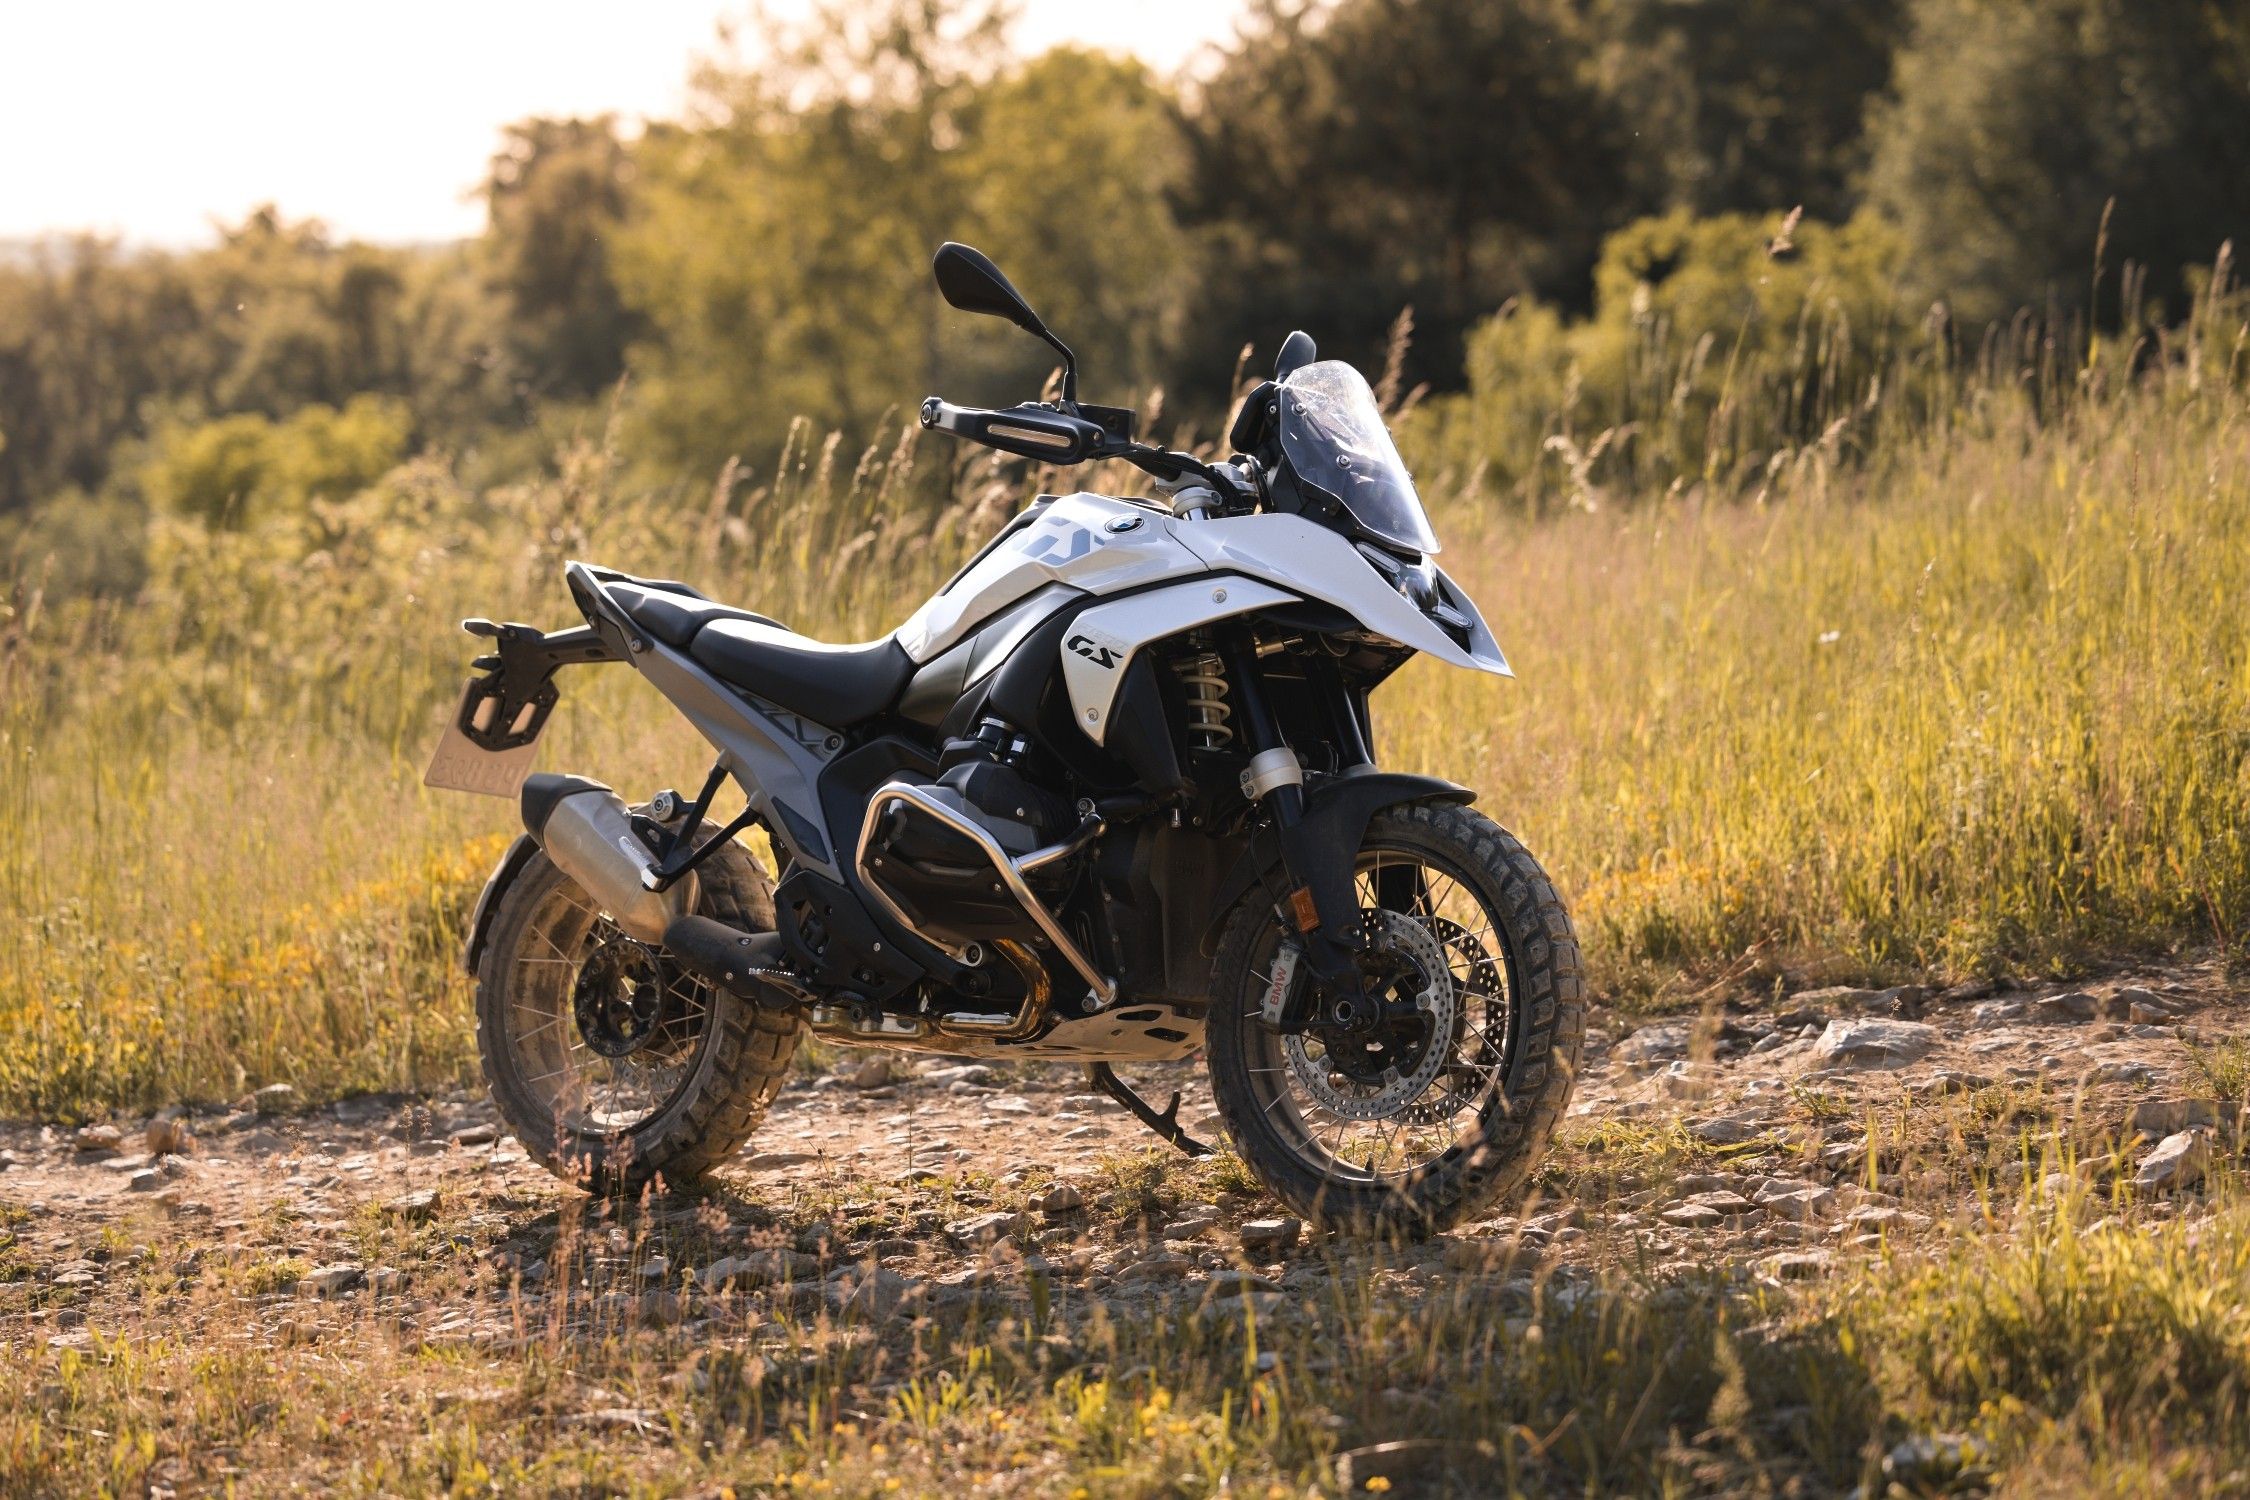 The 2024 BMW R 1300 GS Is Finally Here To Stir Up The Adventure Bike World